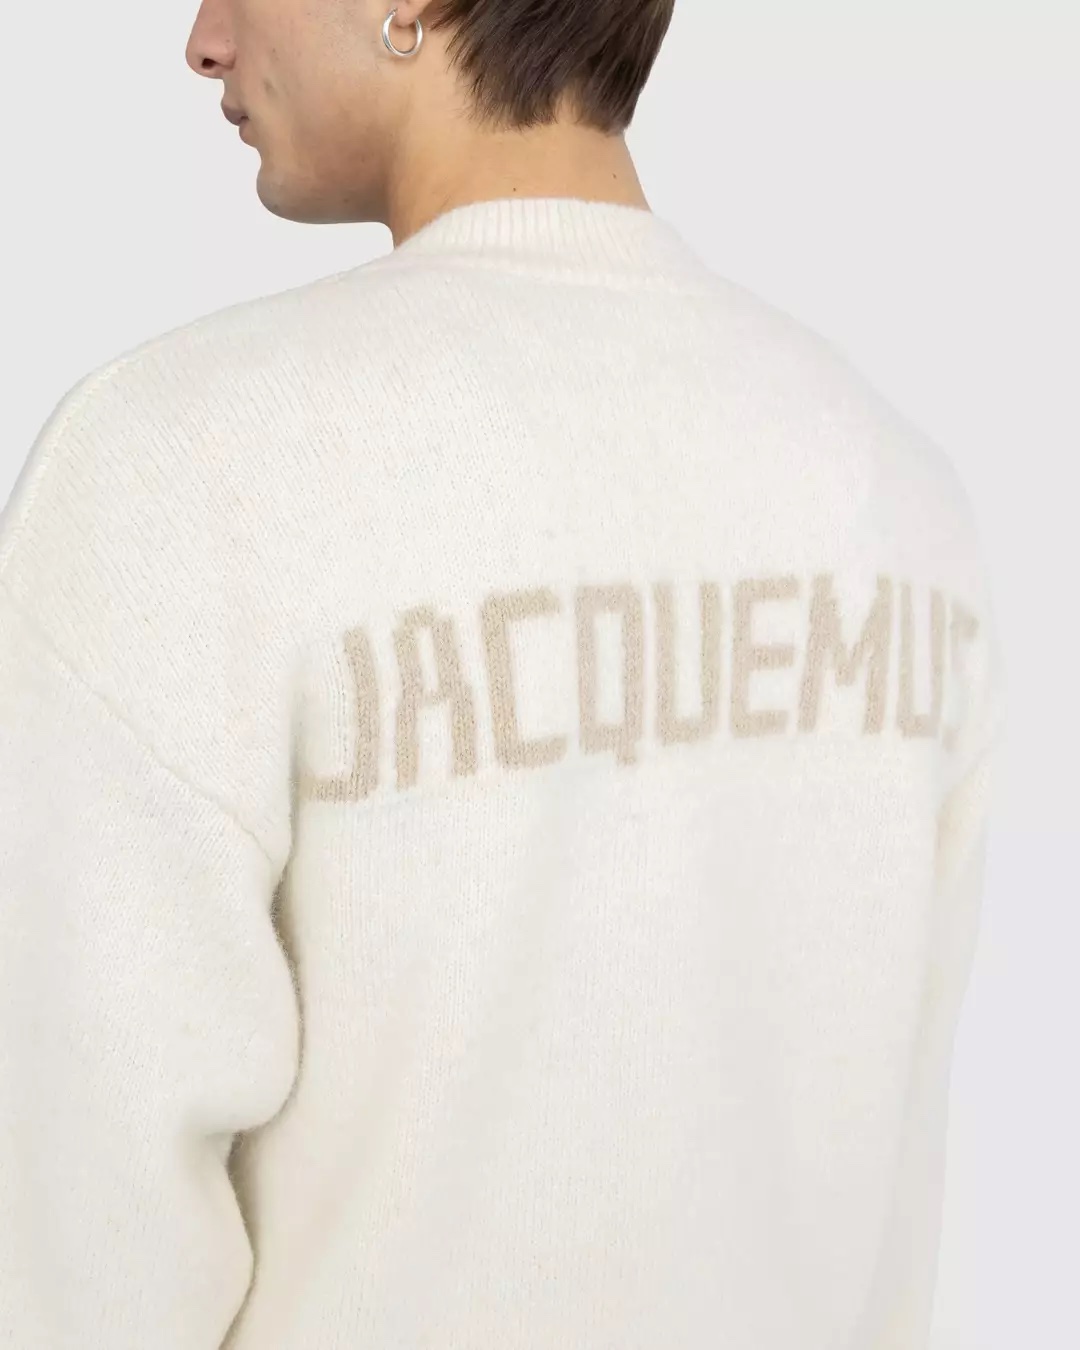 Jacquemus: What to Know About the Fashion Brand | Highsnobiety